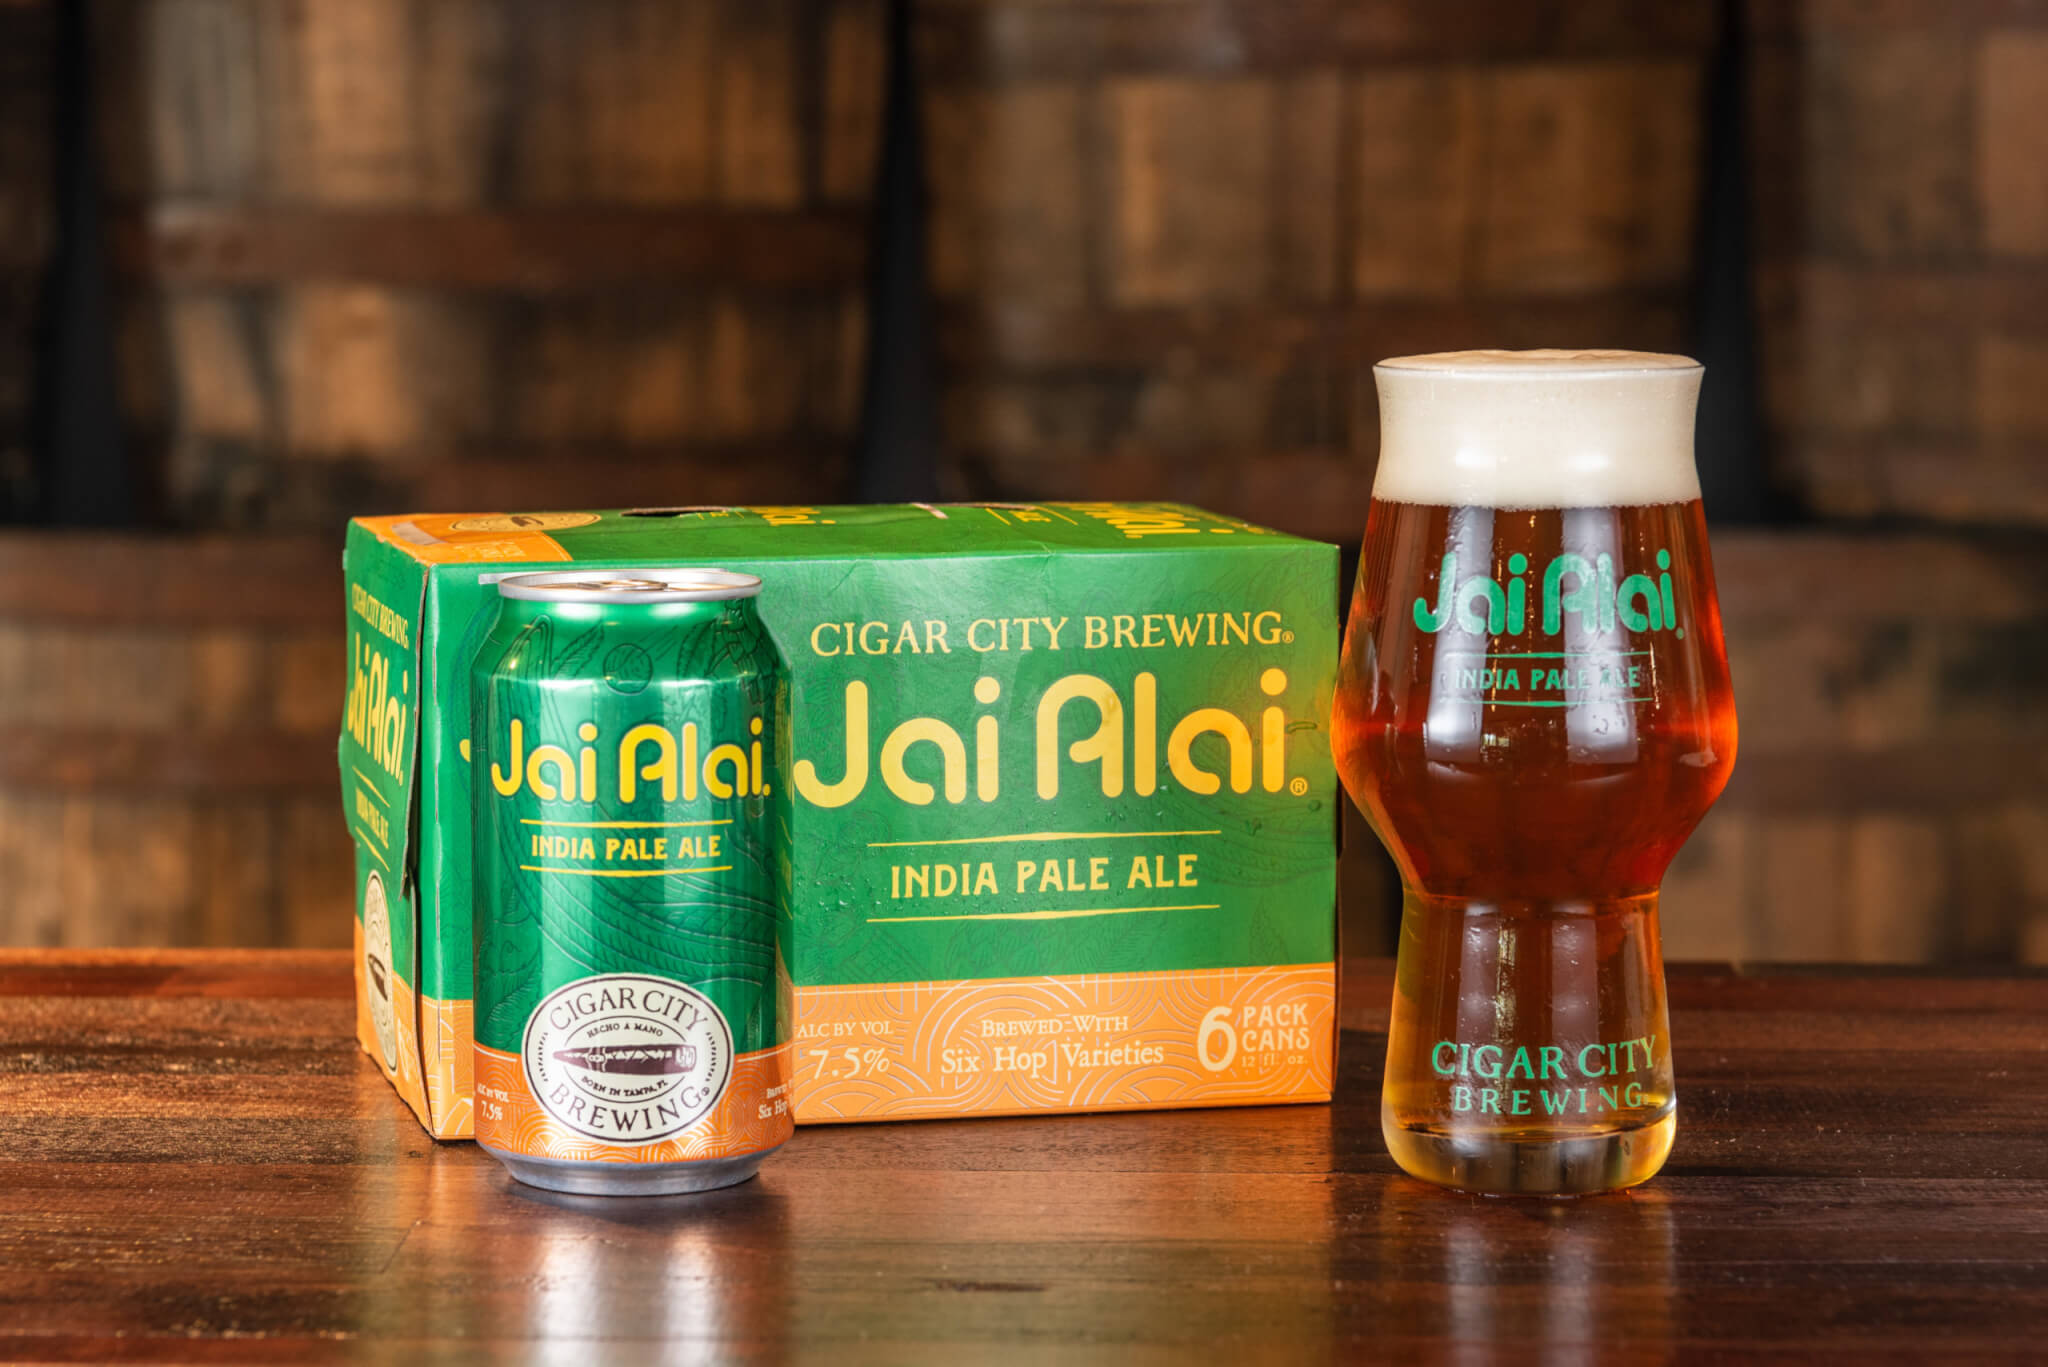 Cigar City Brewing's flagship beer, Jai Alai IPA, is available in cans and no draft.